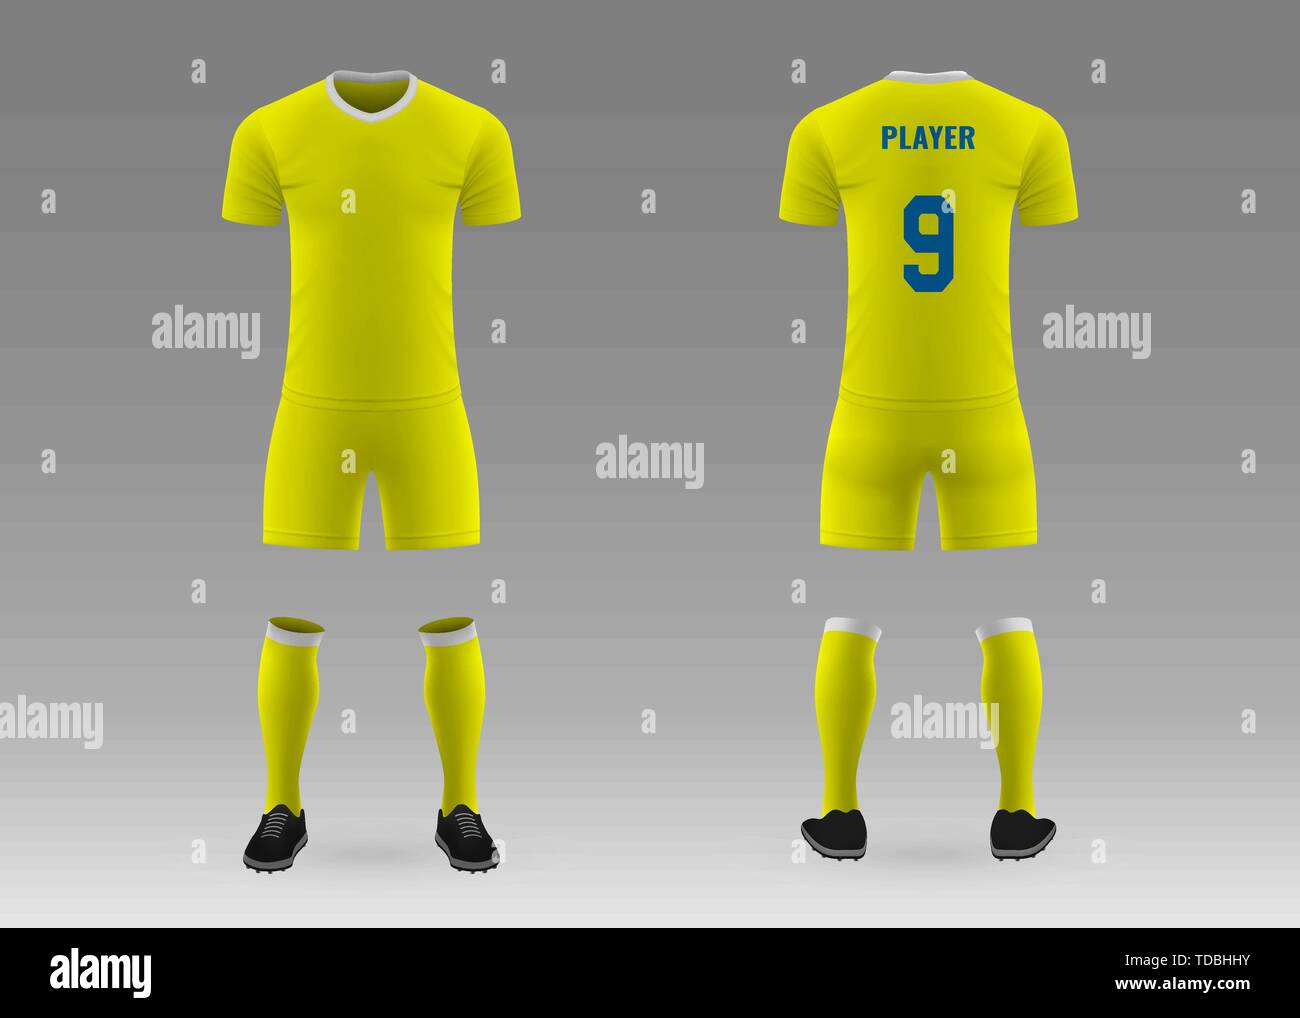 Download 3d Realistic Template Soccer Kit With Jersey Pants And Socks On Shop Backdrop Mockup Of Football Team Uniform Stock Vector Image Art Alamy Free Mockups